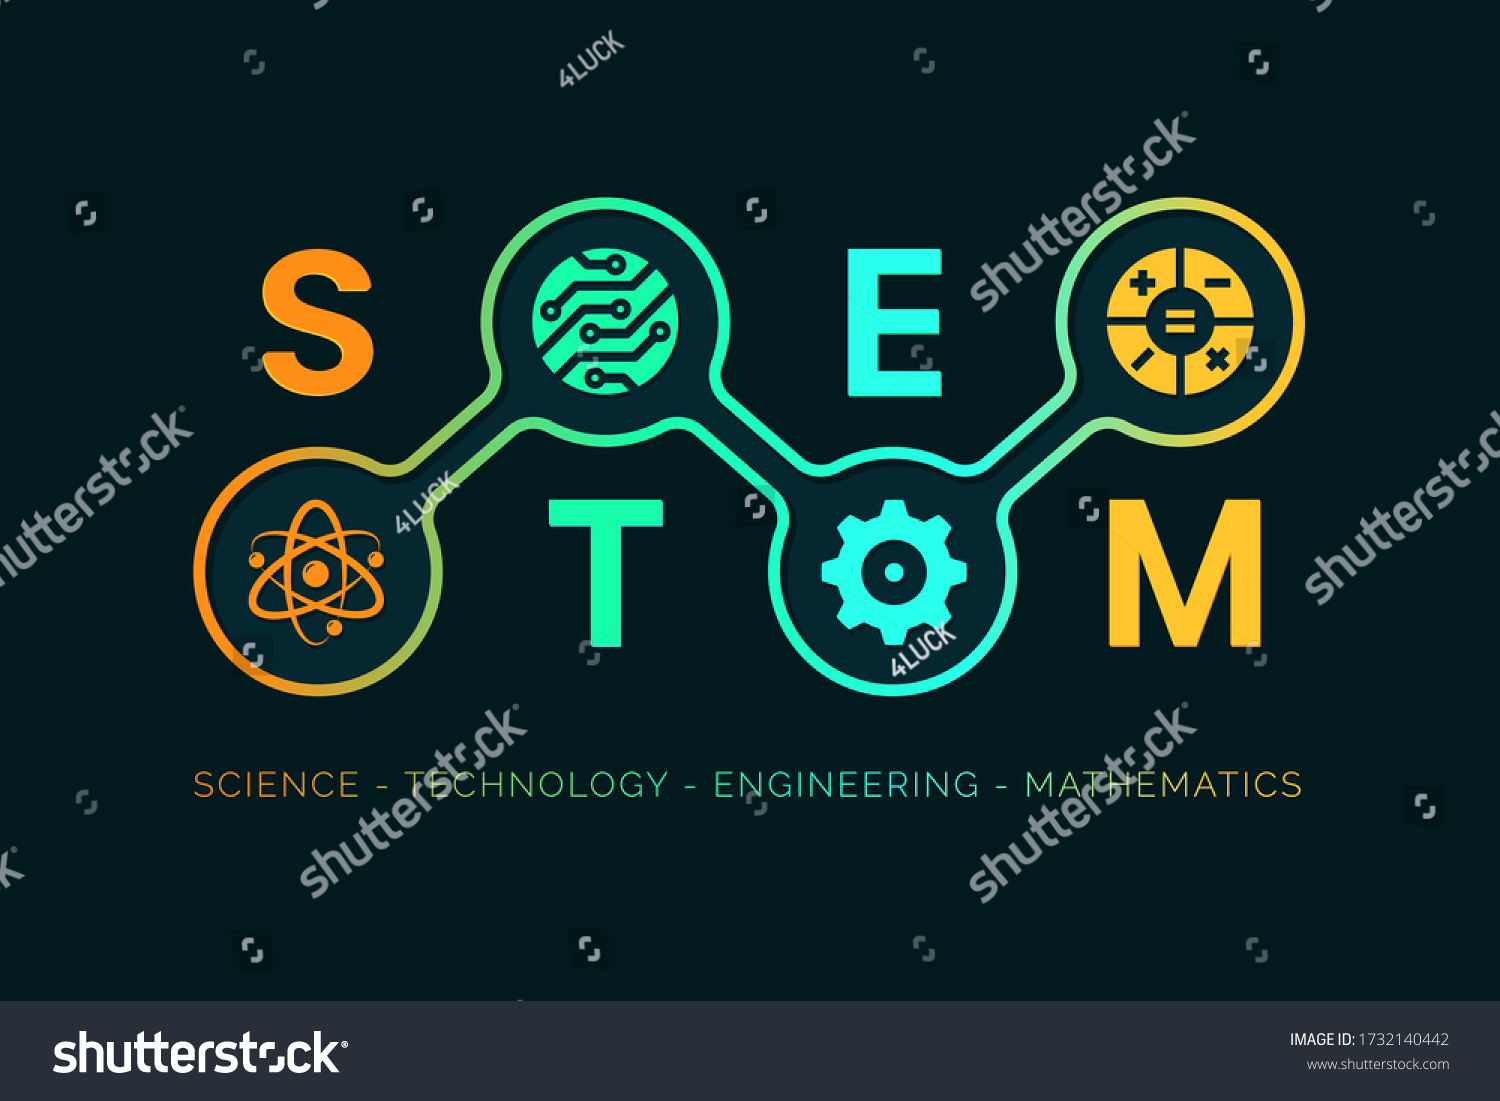 Stem Science Technology Engineering Mathematics Infographic Stock Vector Royalty Free 5359